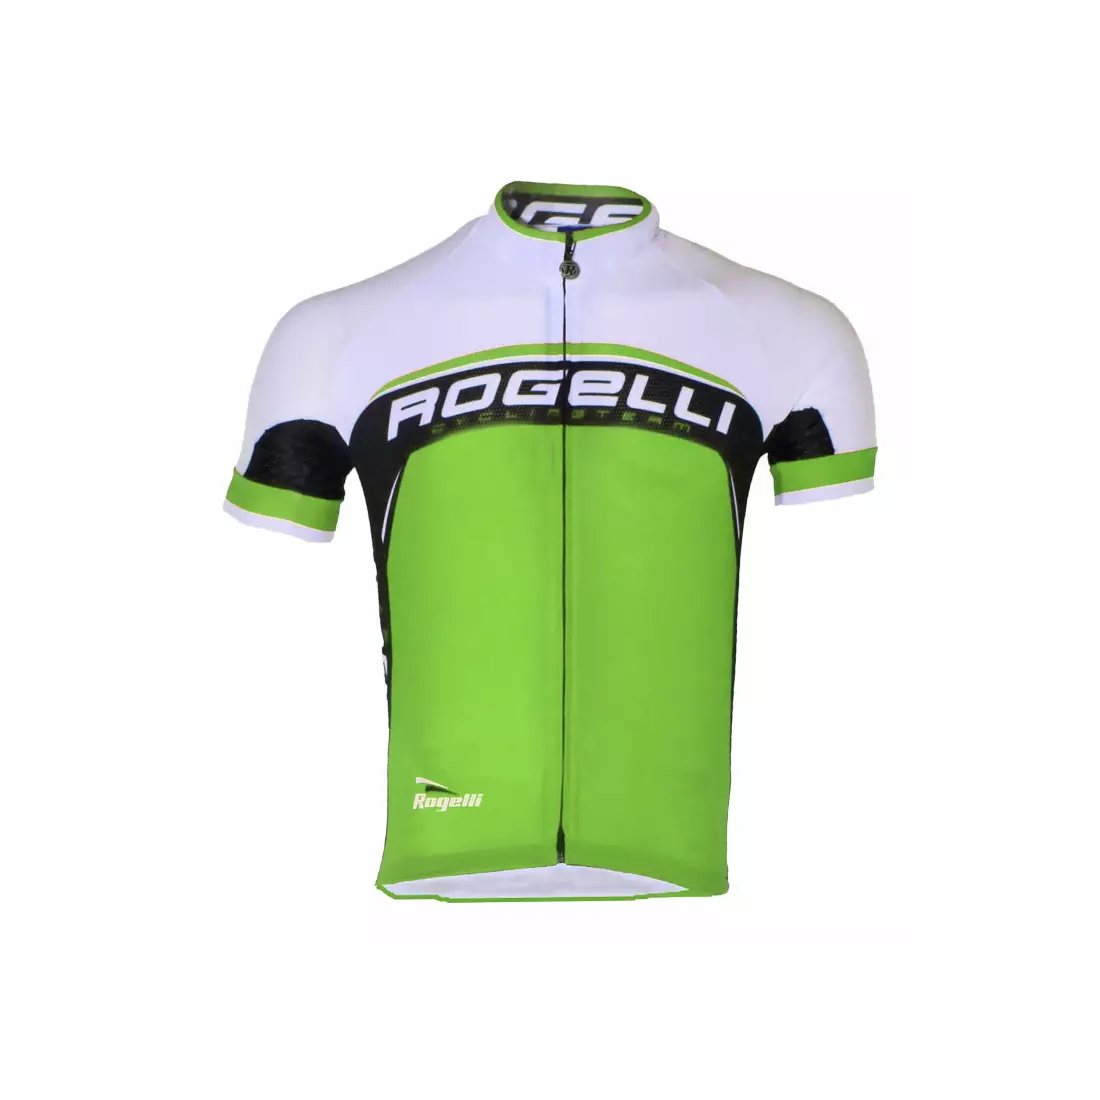 ROGELLI ANCONA - men's cycling jersey, white and green